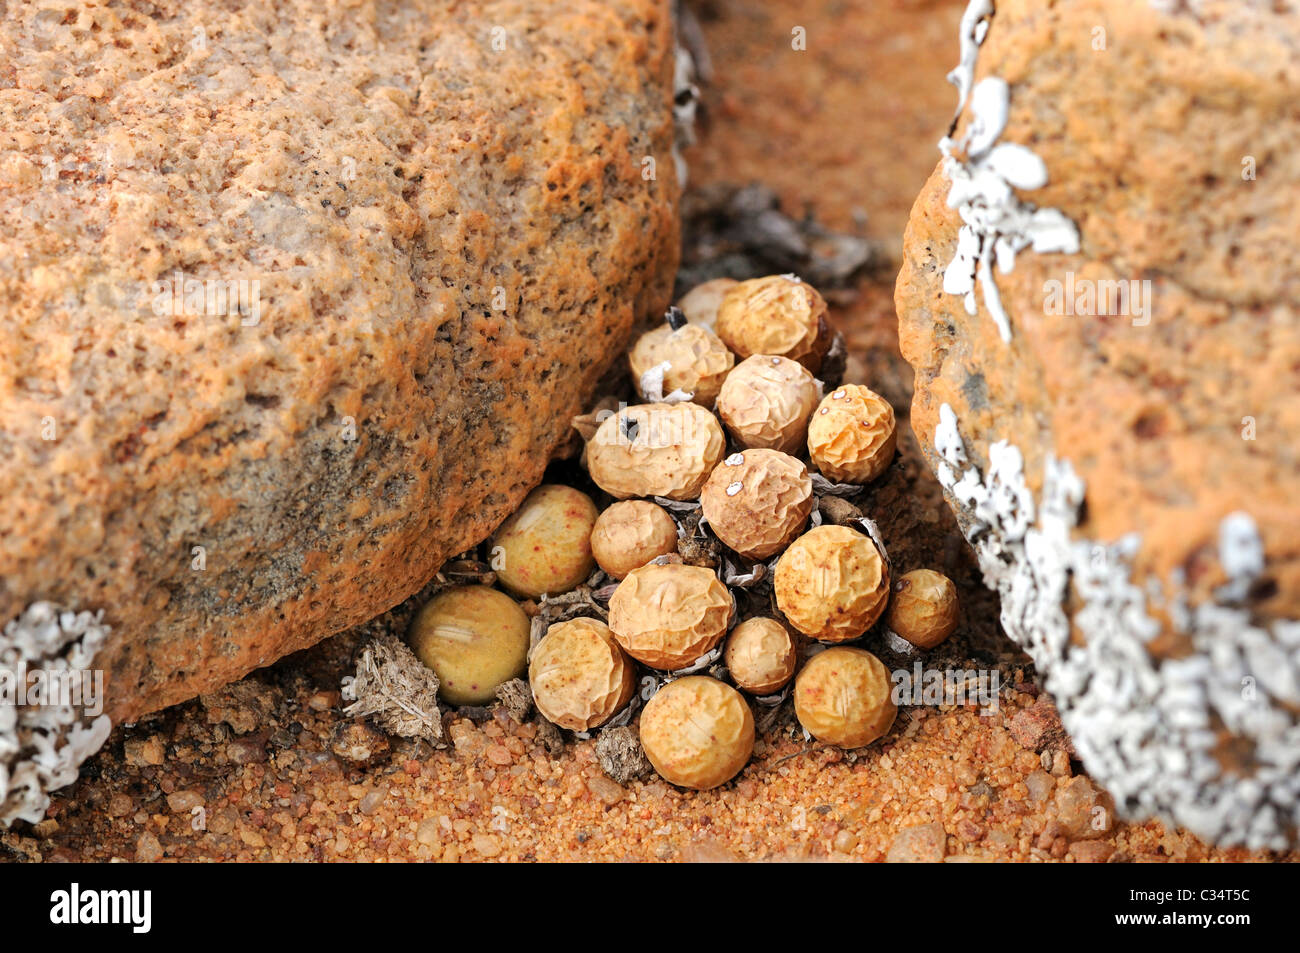 Conophytum sp. waiting for the rainfall to come, Aizoaceae, Mesembs, Naries, Namaqualand, South Africa Stock Photo